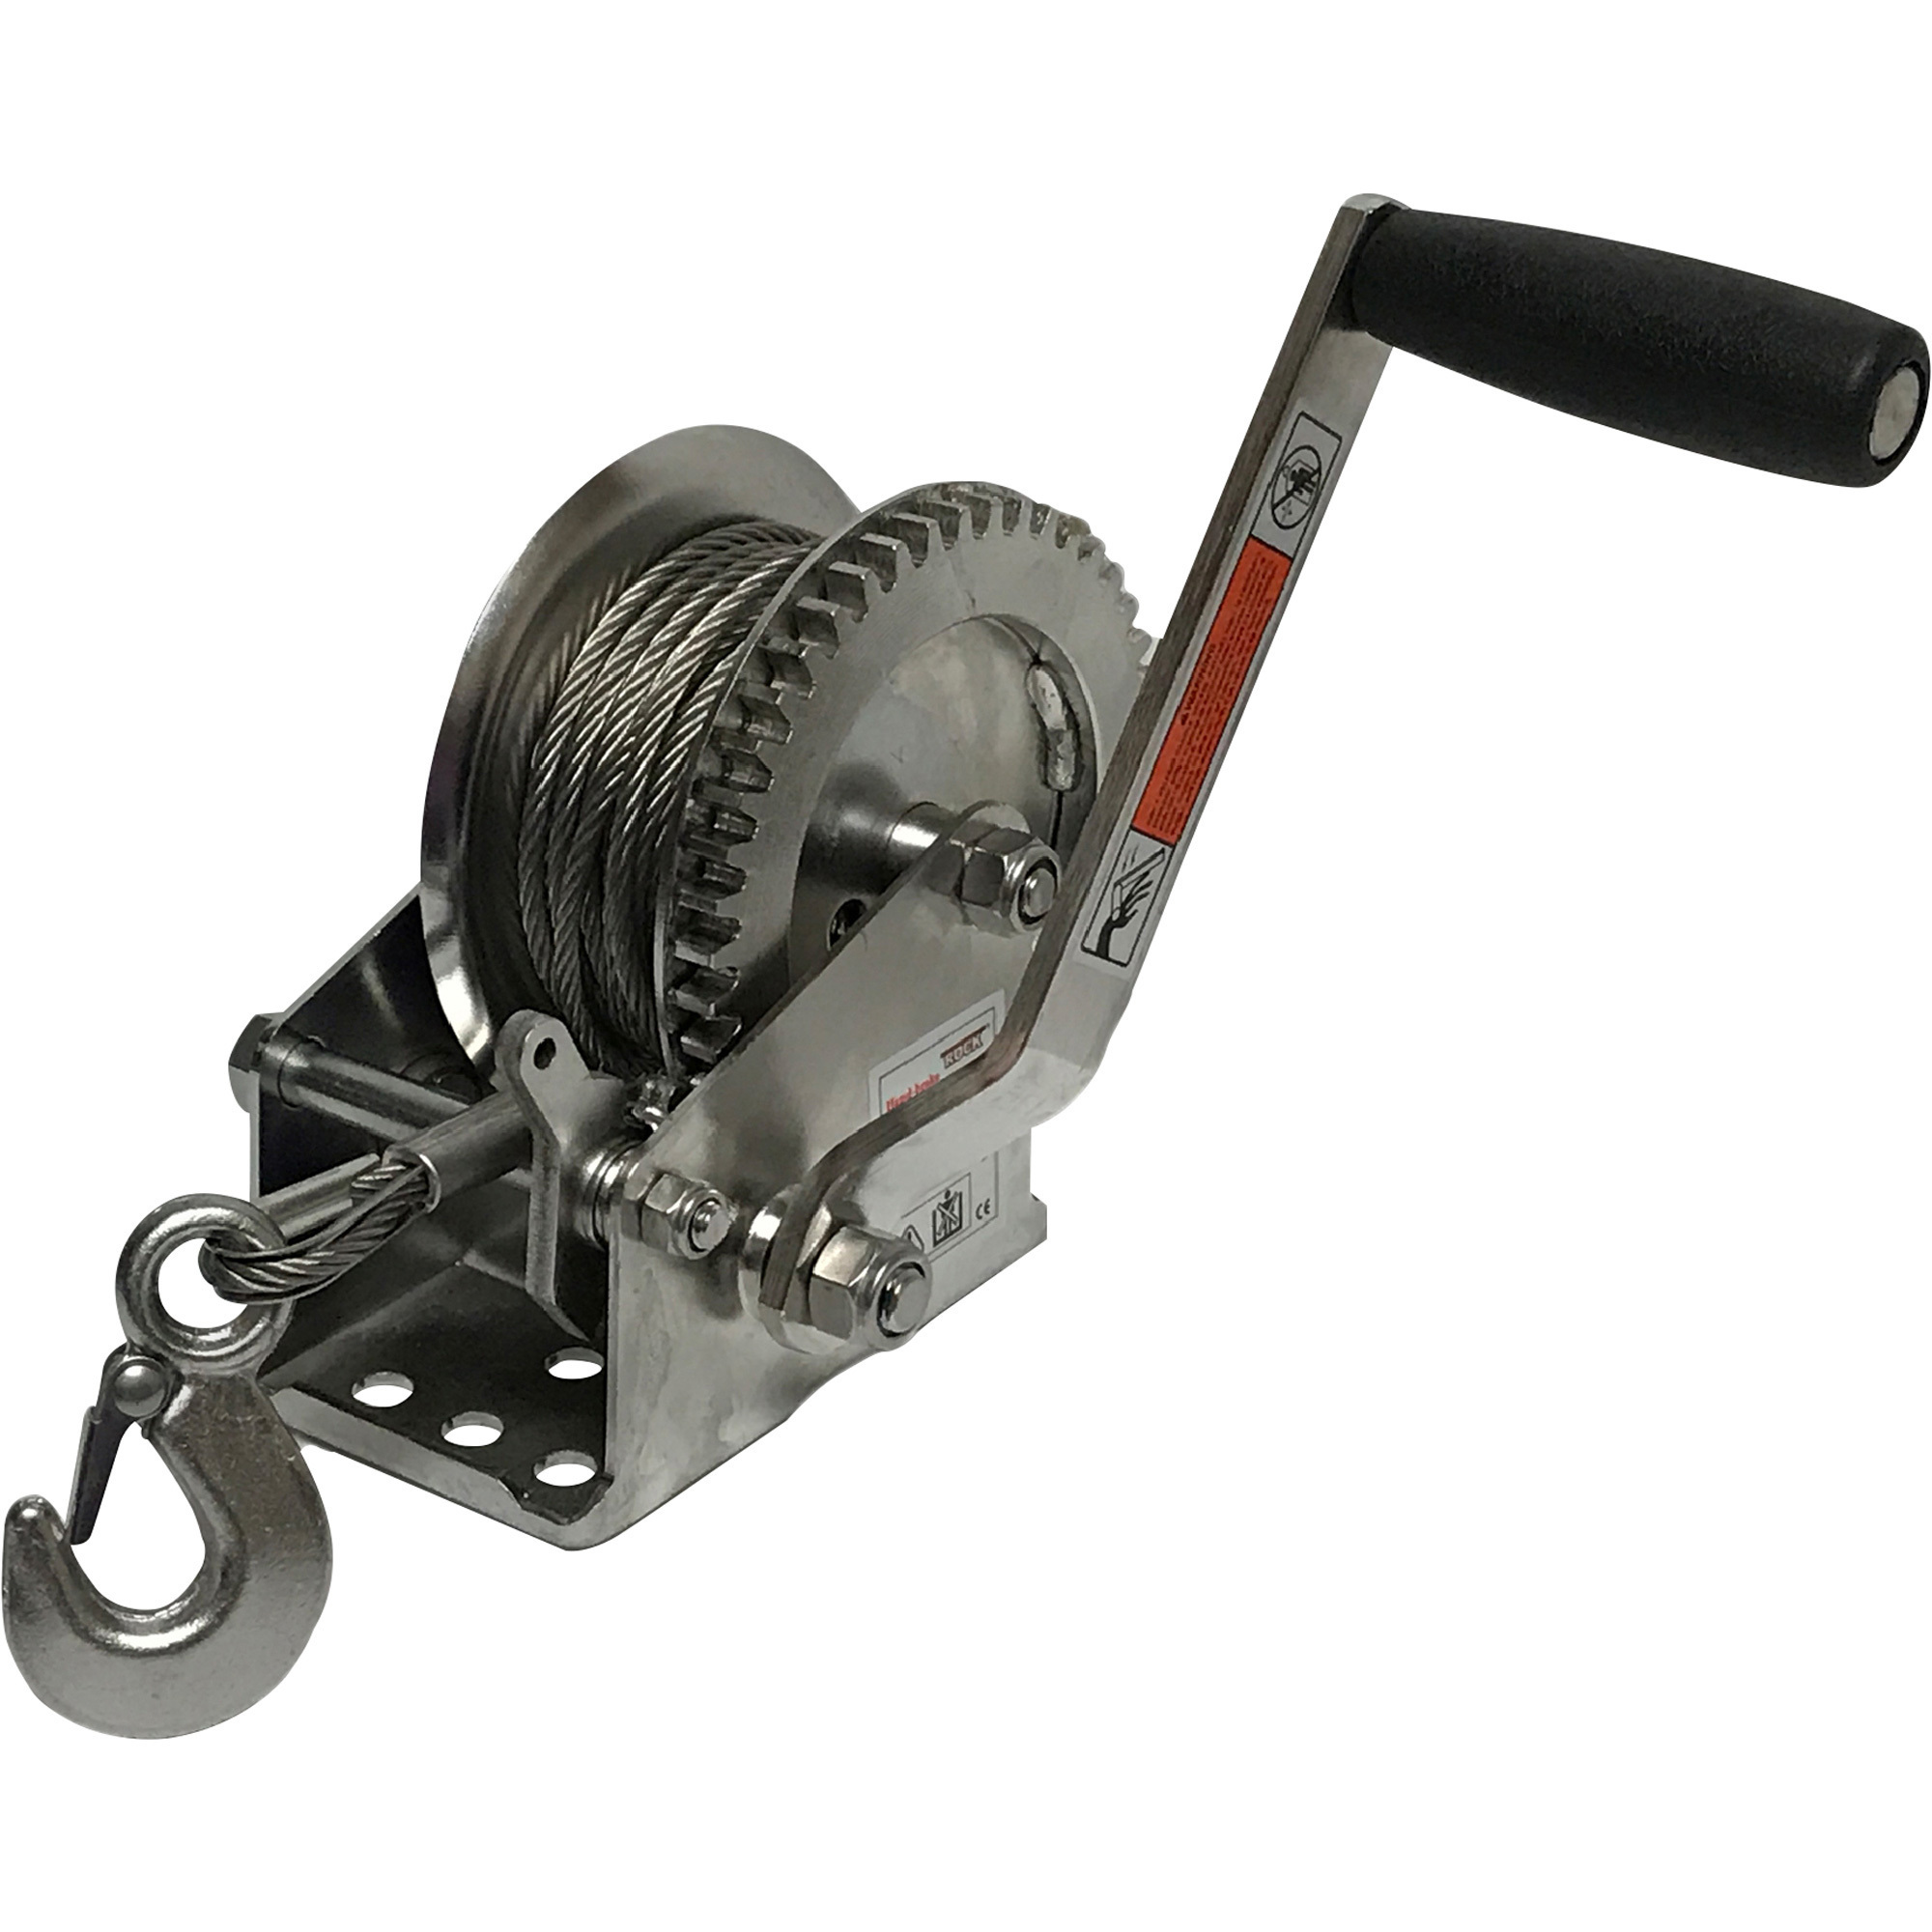 Endurance Marine Stainless Steel Hand Winch — 50ft. Wire Cable, 1400-Lb.  Capacity, Manual Brake, Model# EBW1400SSC Northern Tool